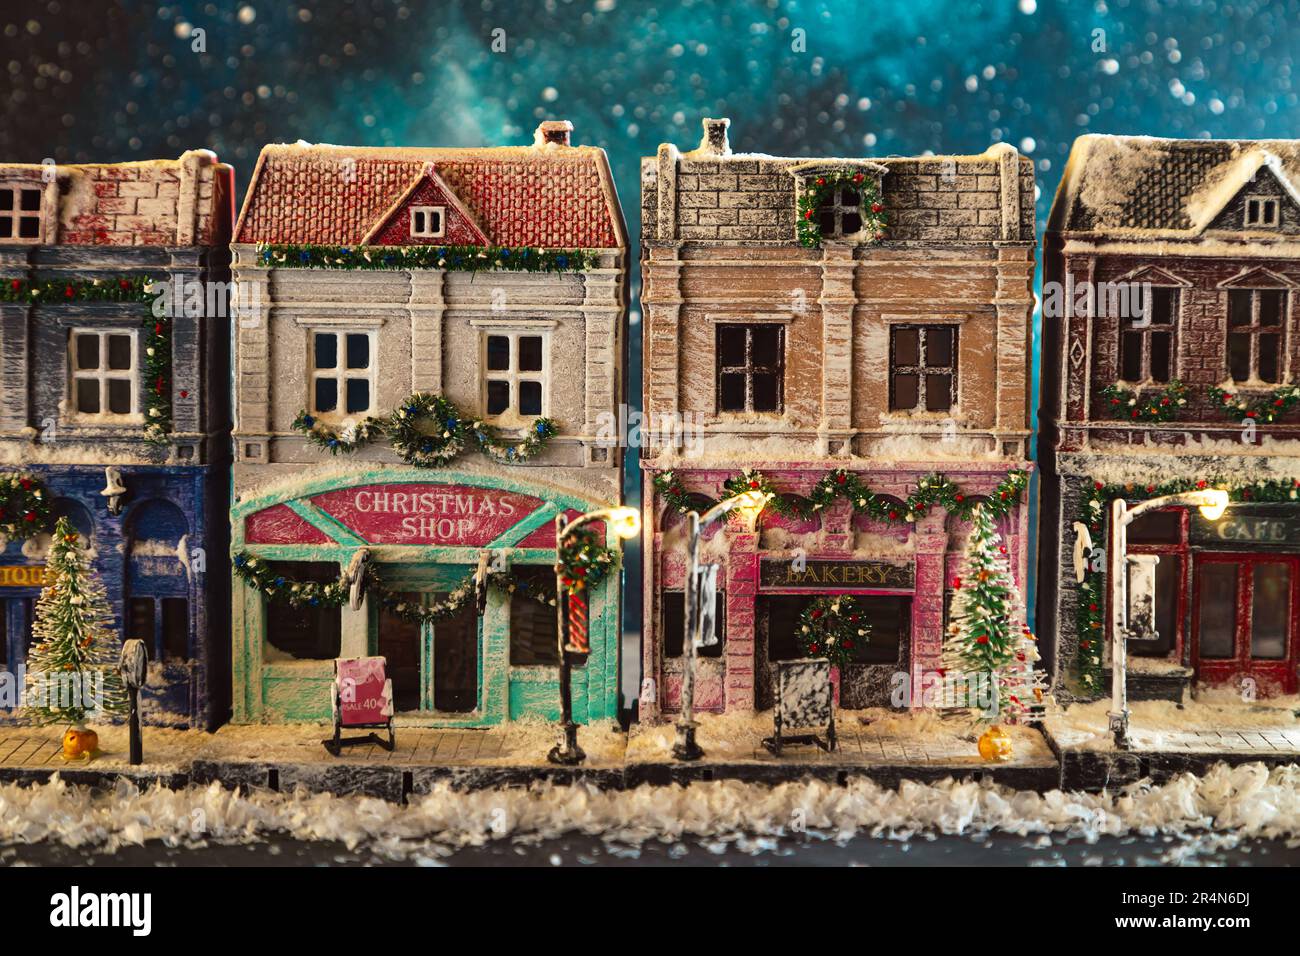 Night snow-covered European street decorated for Christmas. Homemade decorated toy houses. All elements of the image are made and drawn by hand. Stock Photo